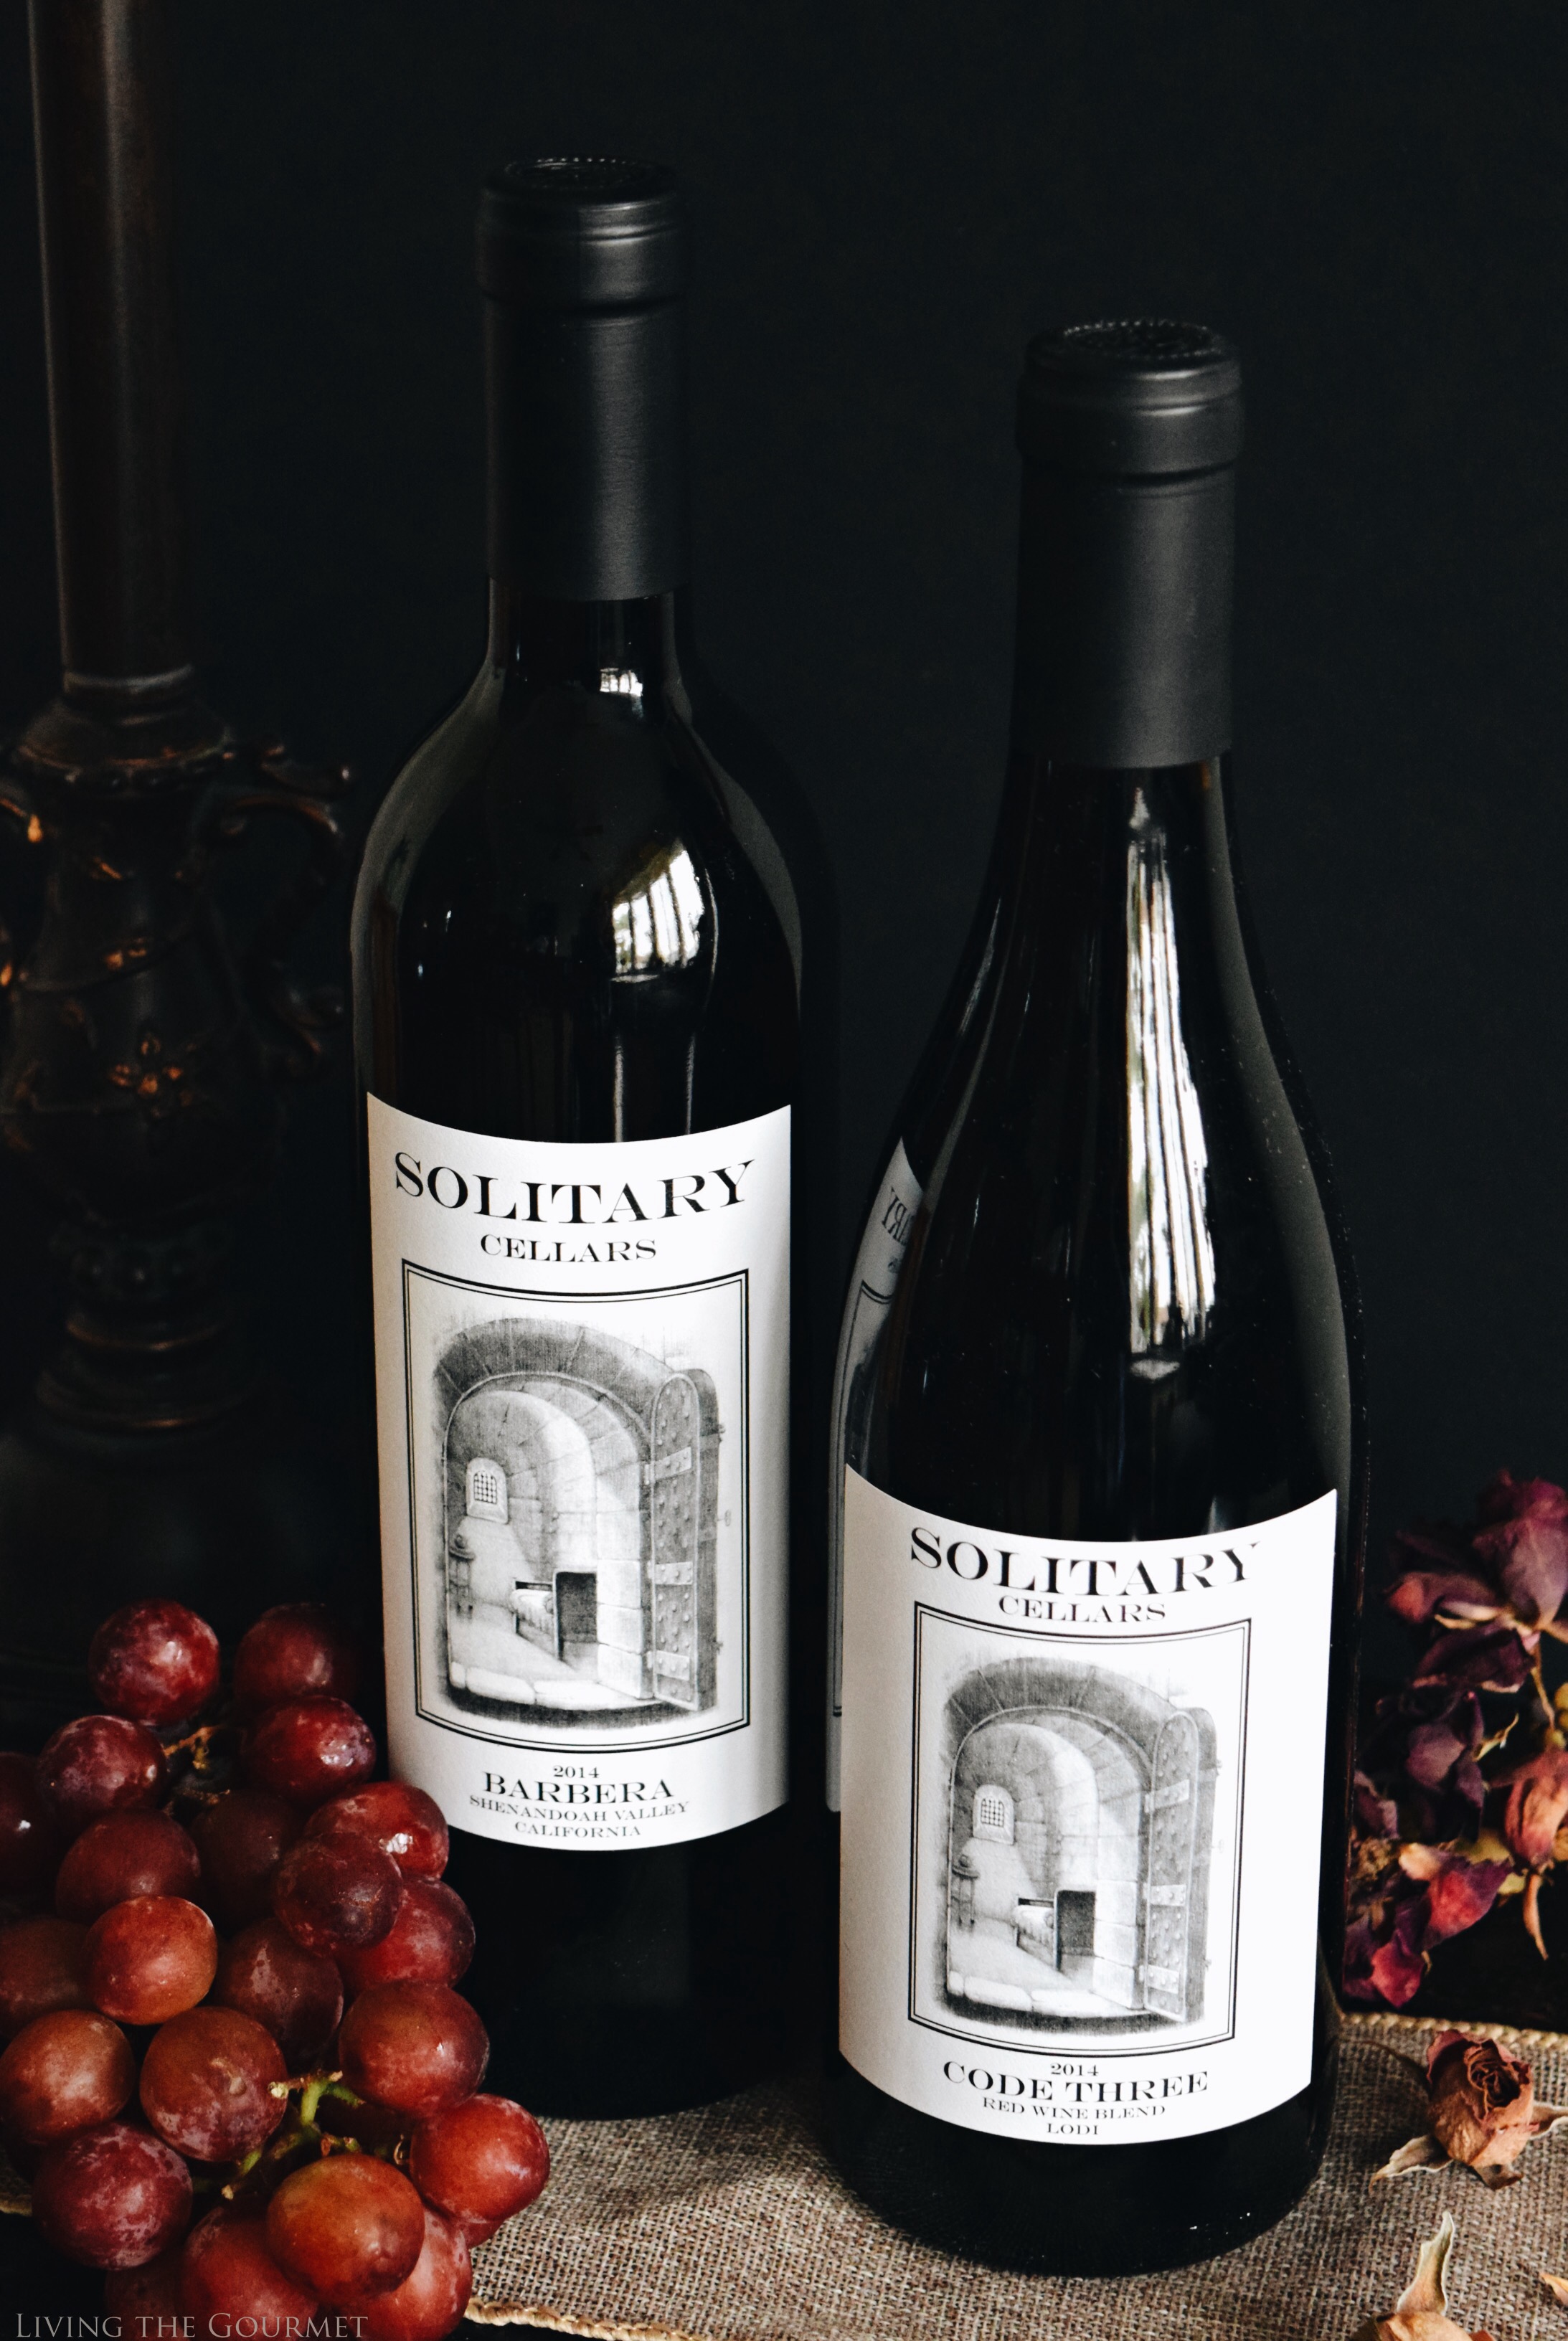 Living the Gourmet: Solitary Wines